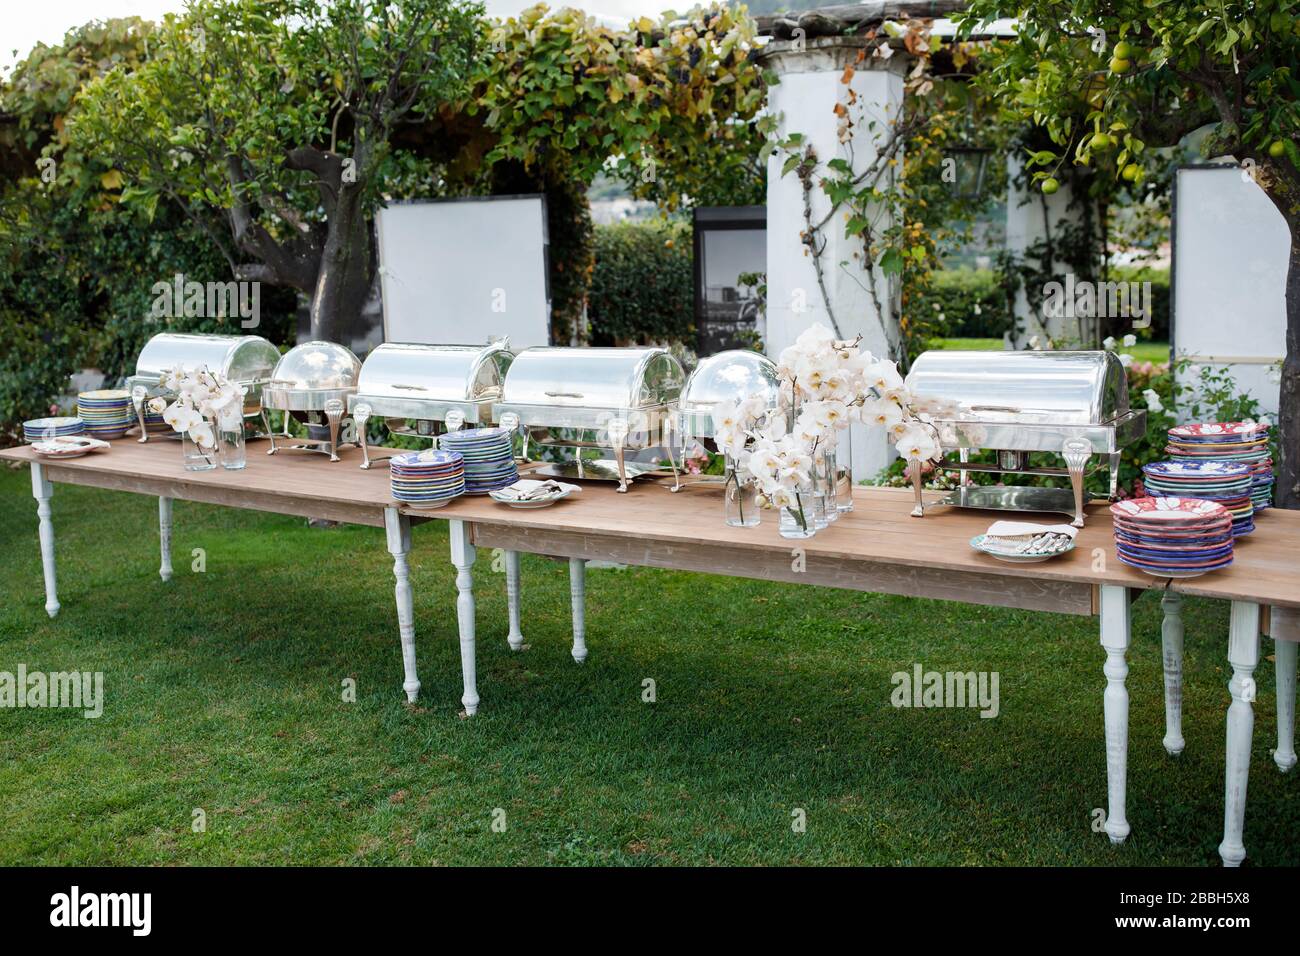 Outdoor Spring Or Summer Casual Garden Party Set Up For Lunch